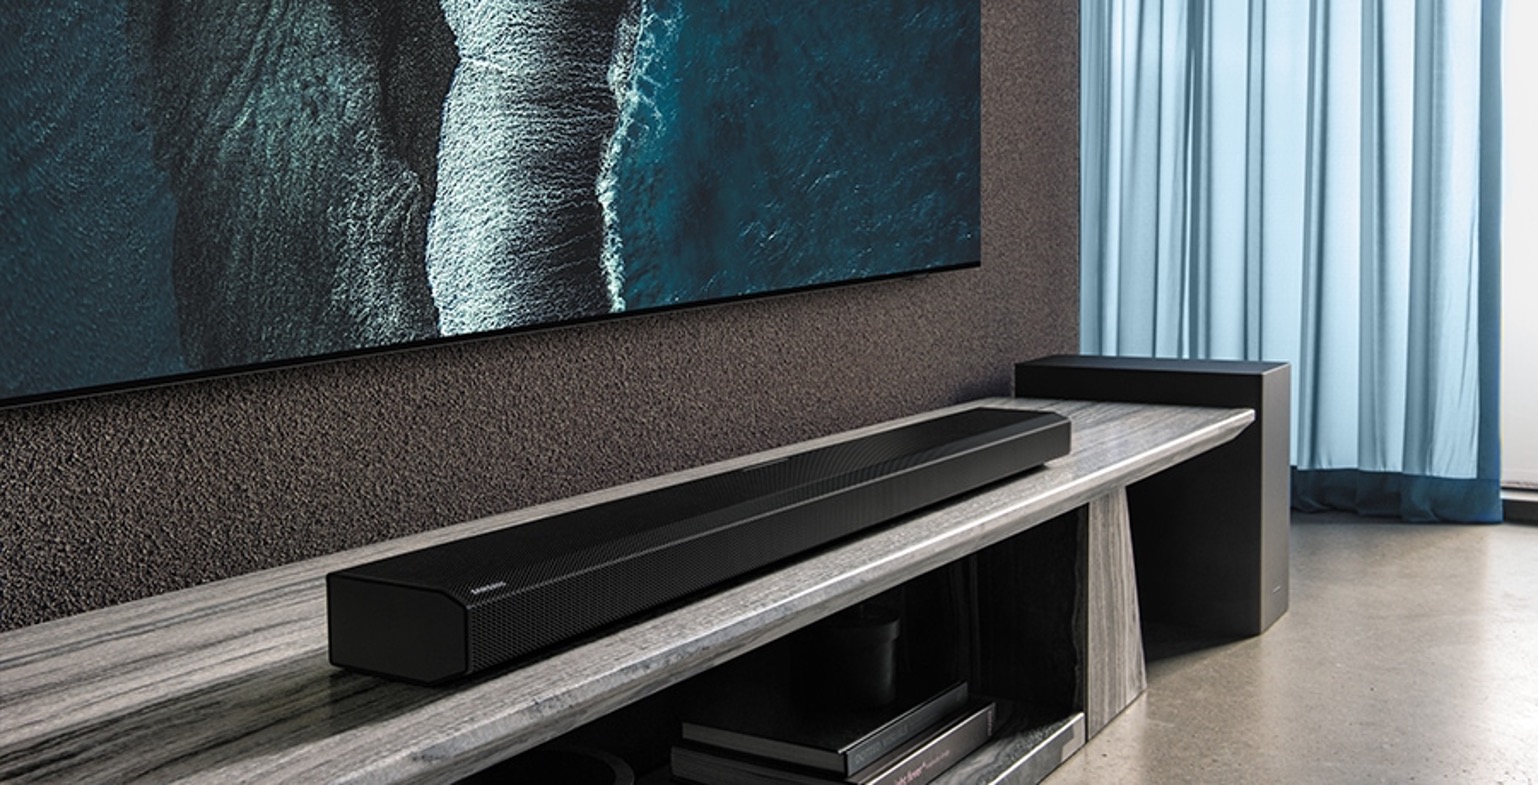 How To Connect A Samsung Subwoofer To A Soundbar